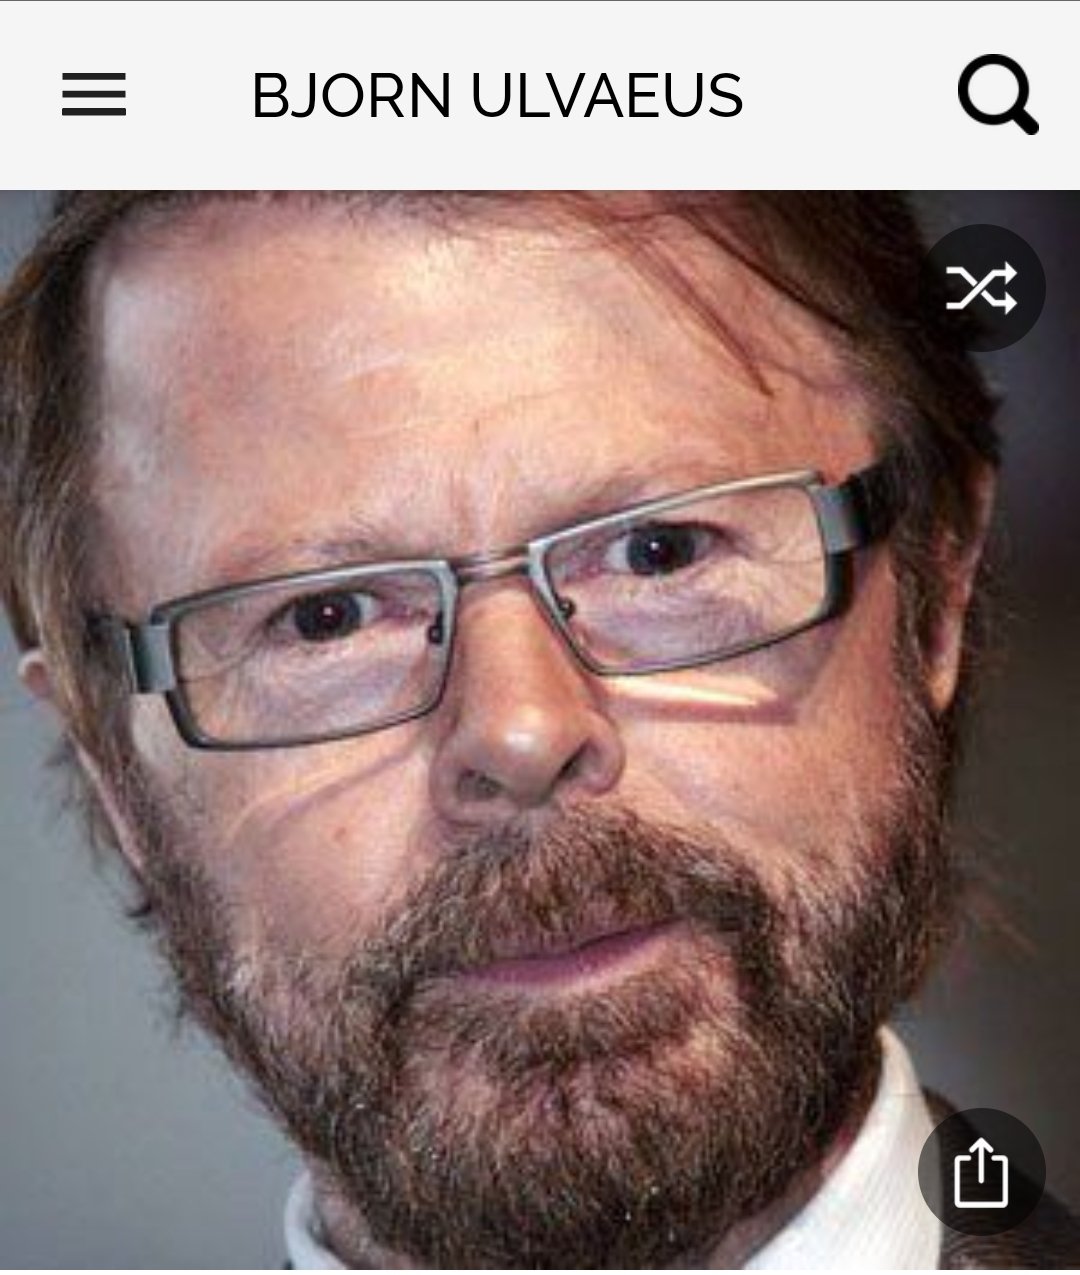 Happy Birthday to this great singer. He was a singer in ABBA. Happy Birthday to Bjorn Ulvaeus 